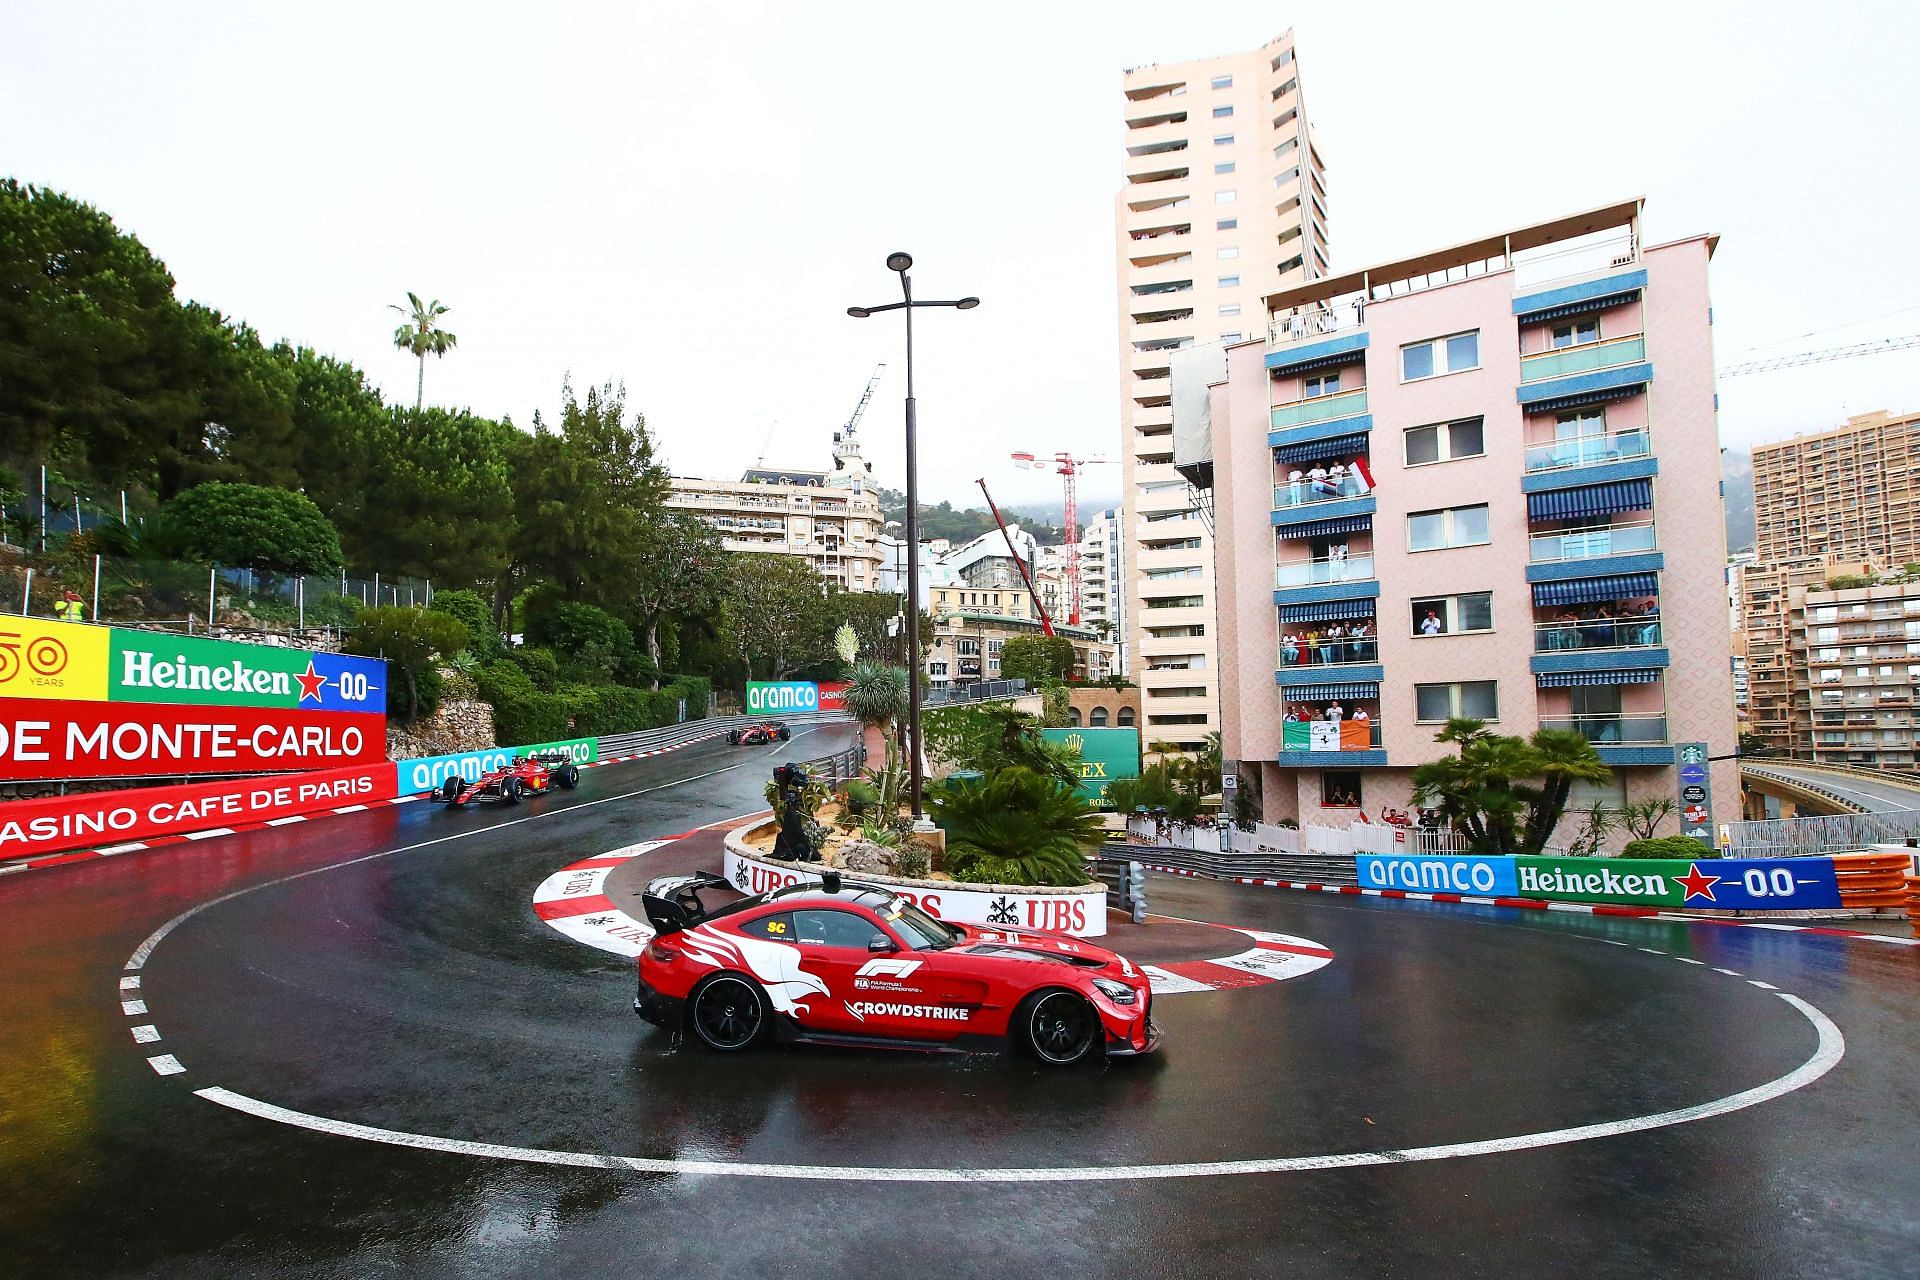 The future of the Monaco GP hangs in the balance at the moment.